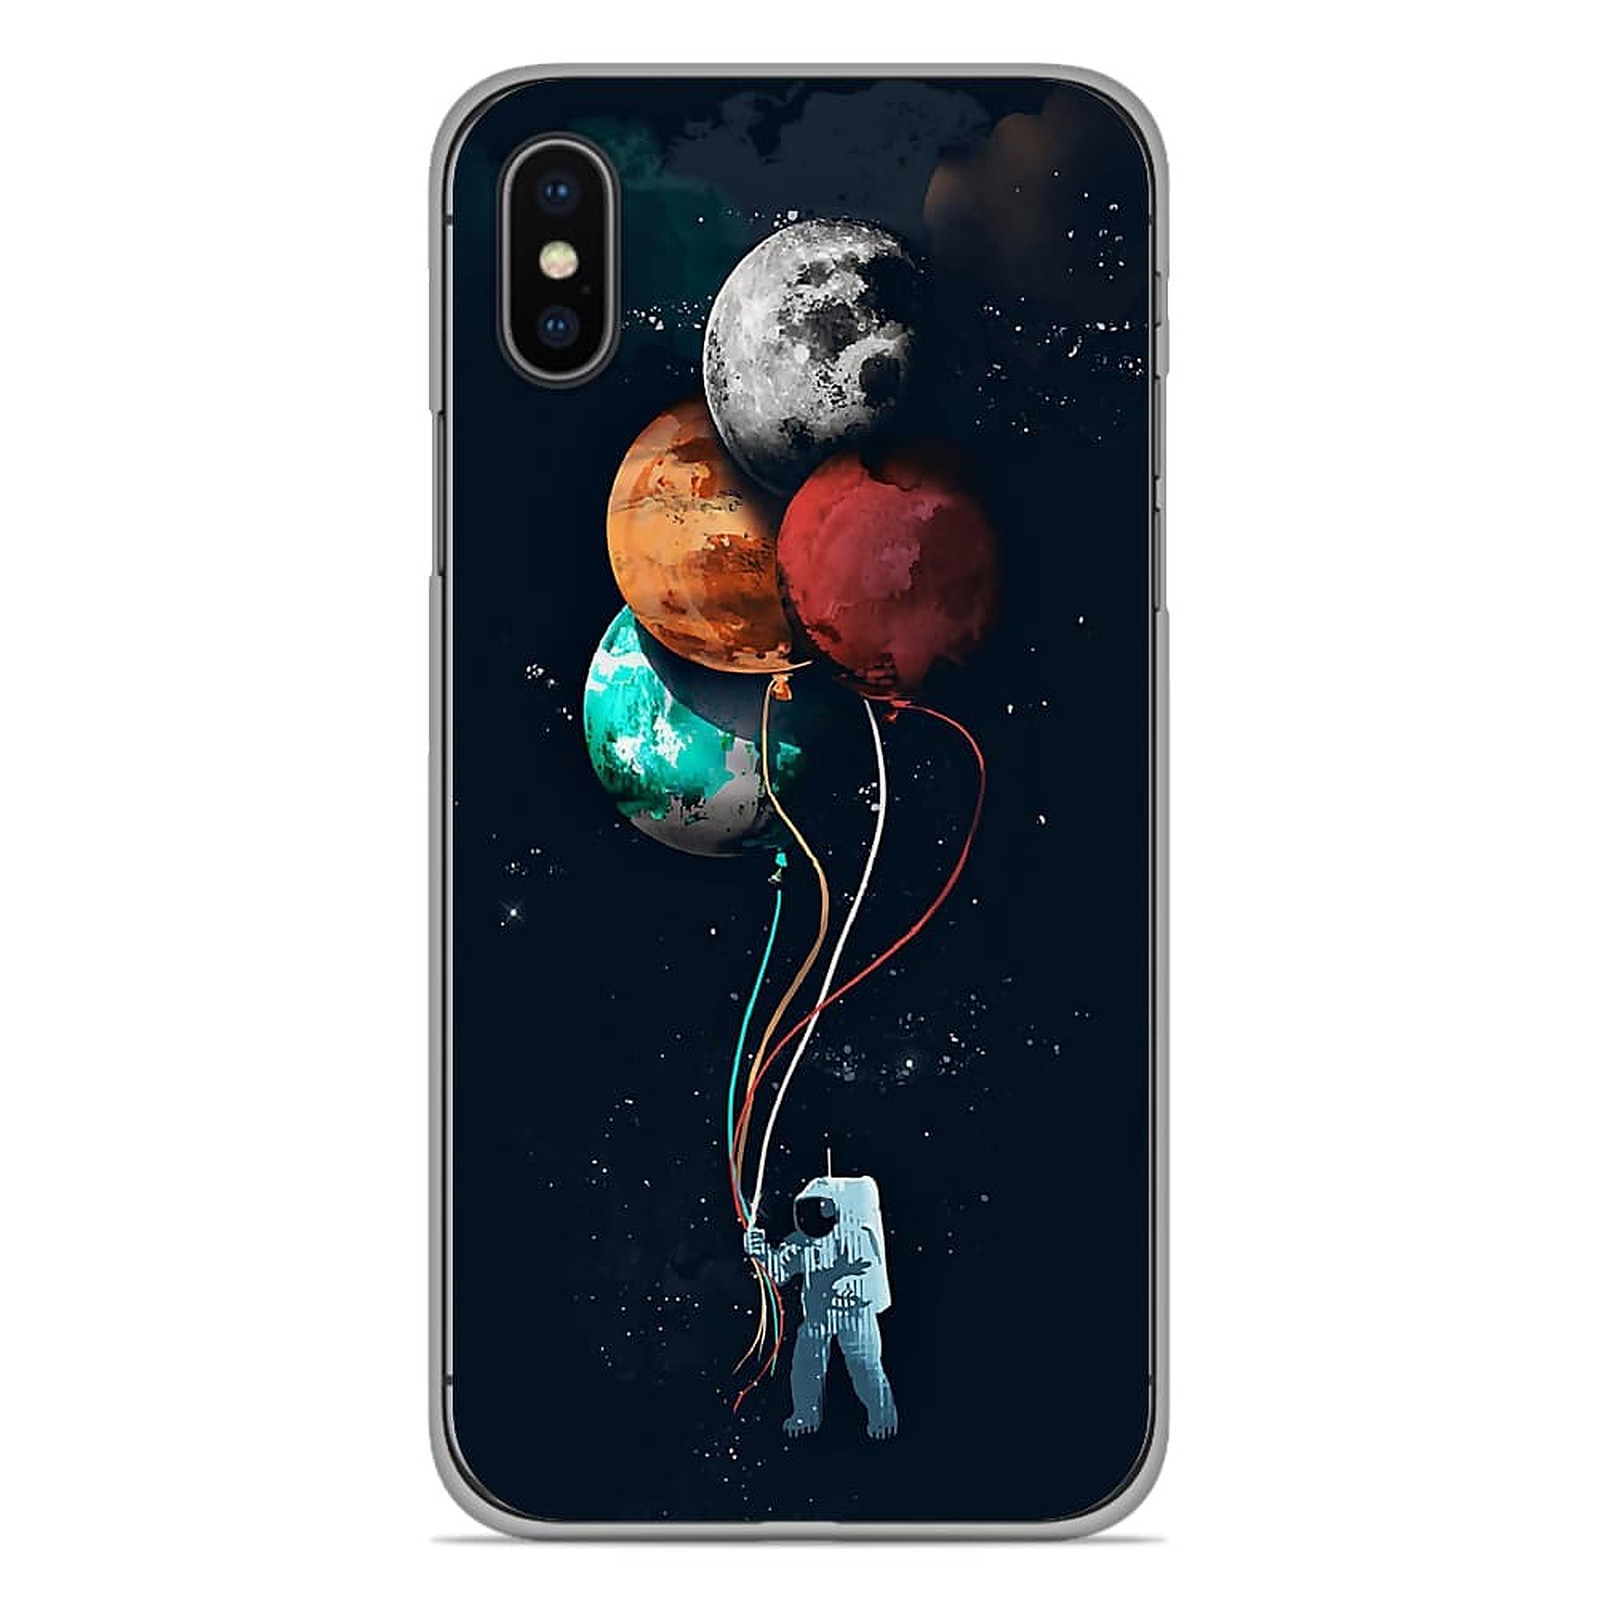 1001 Coques Coque silicone gel Apple iPhone X / XS motif Cosmonaute aux Ballons - Coque telephone 1001Coques